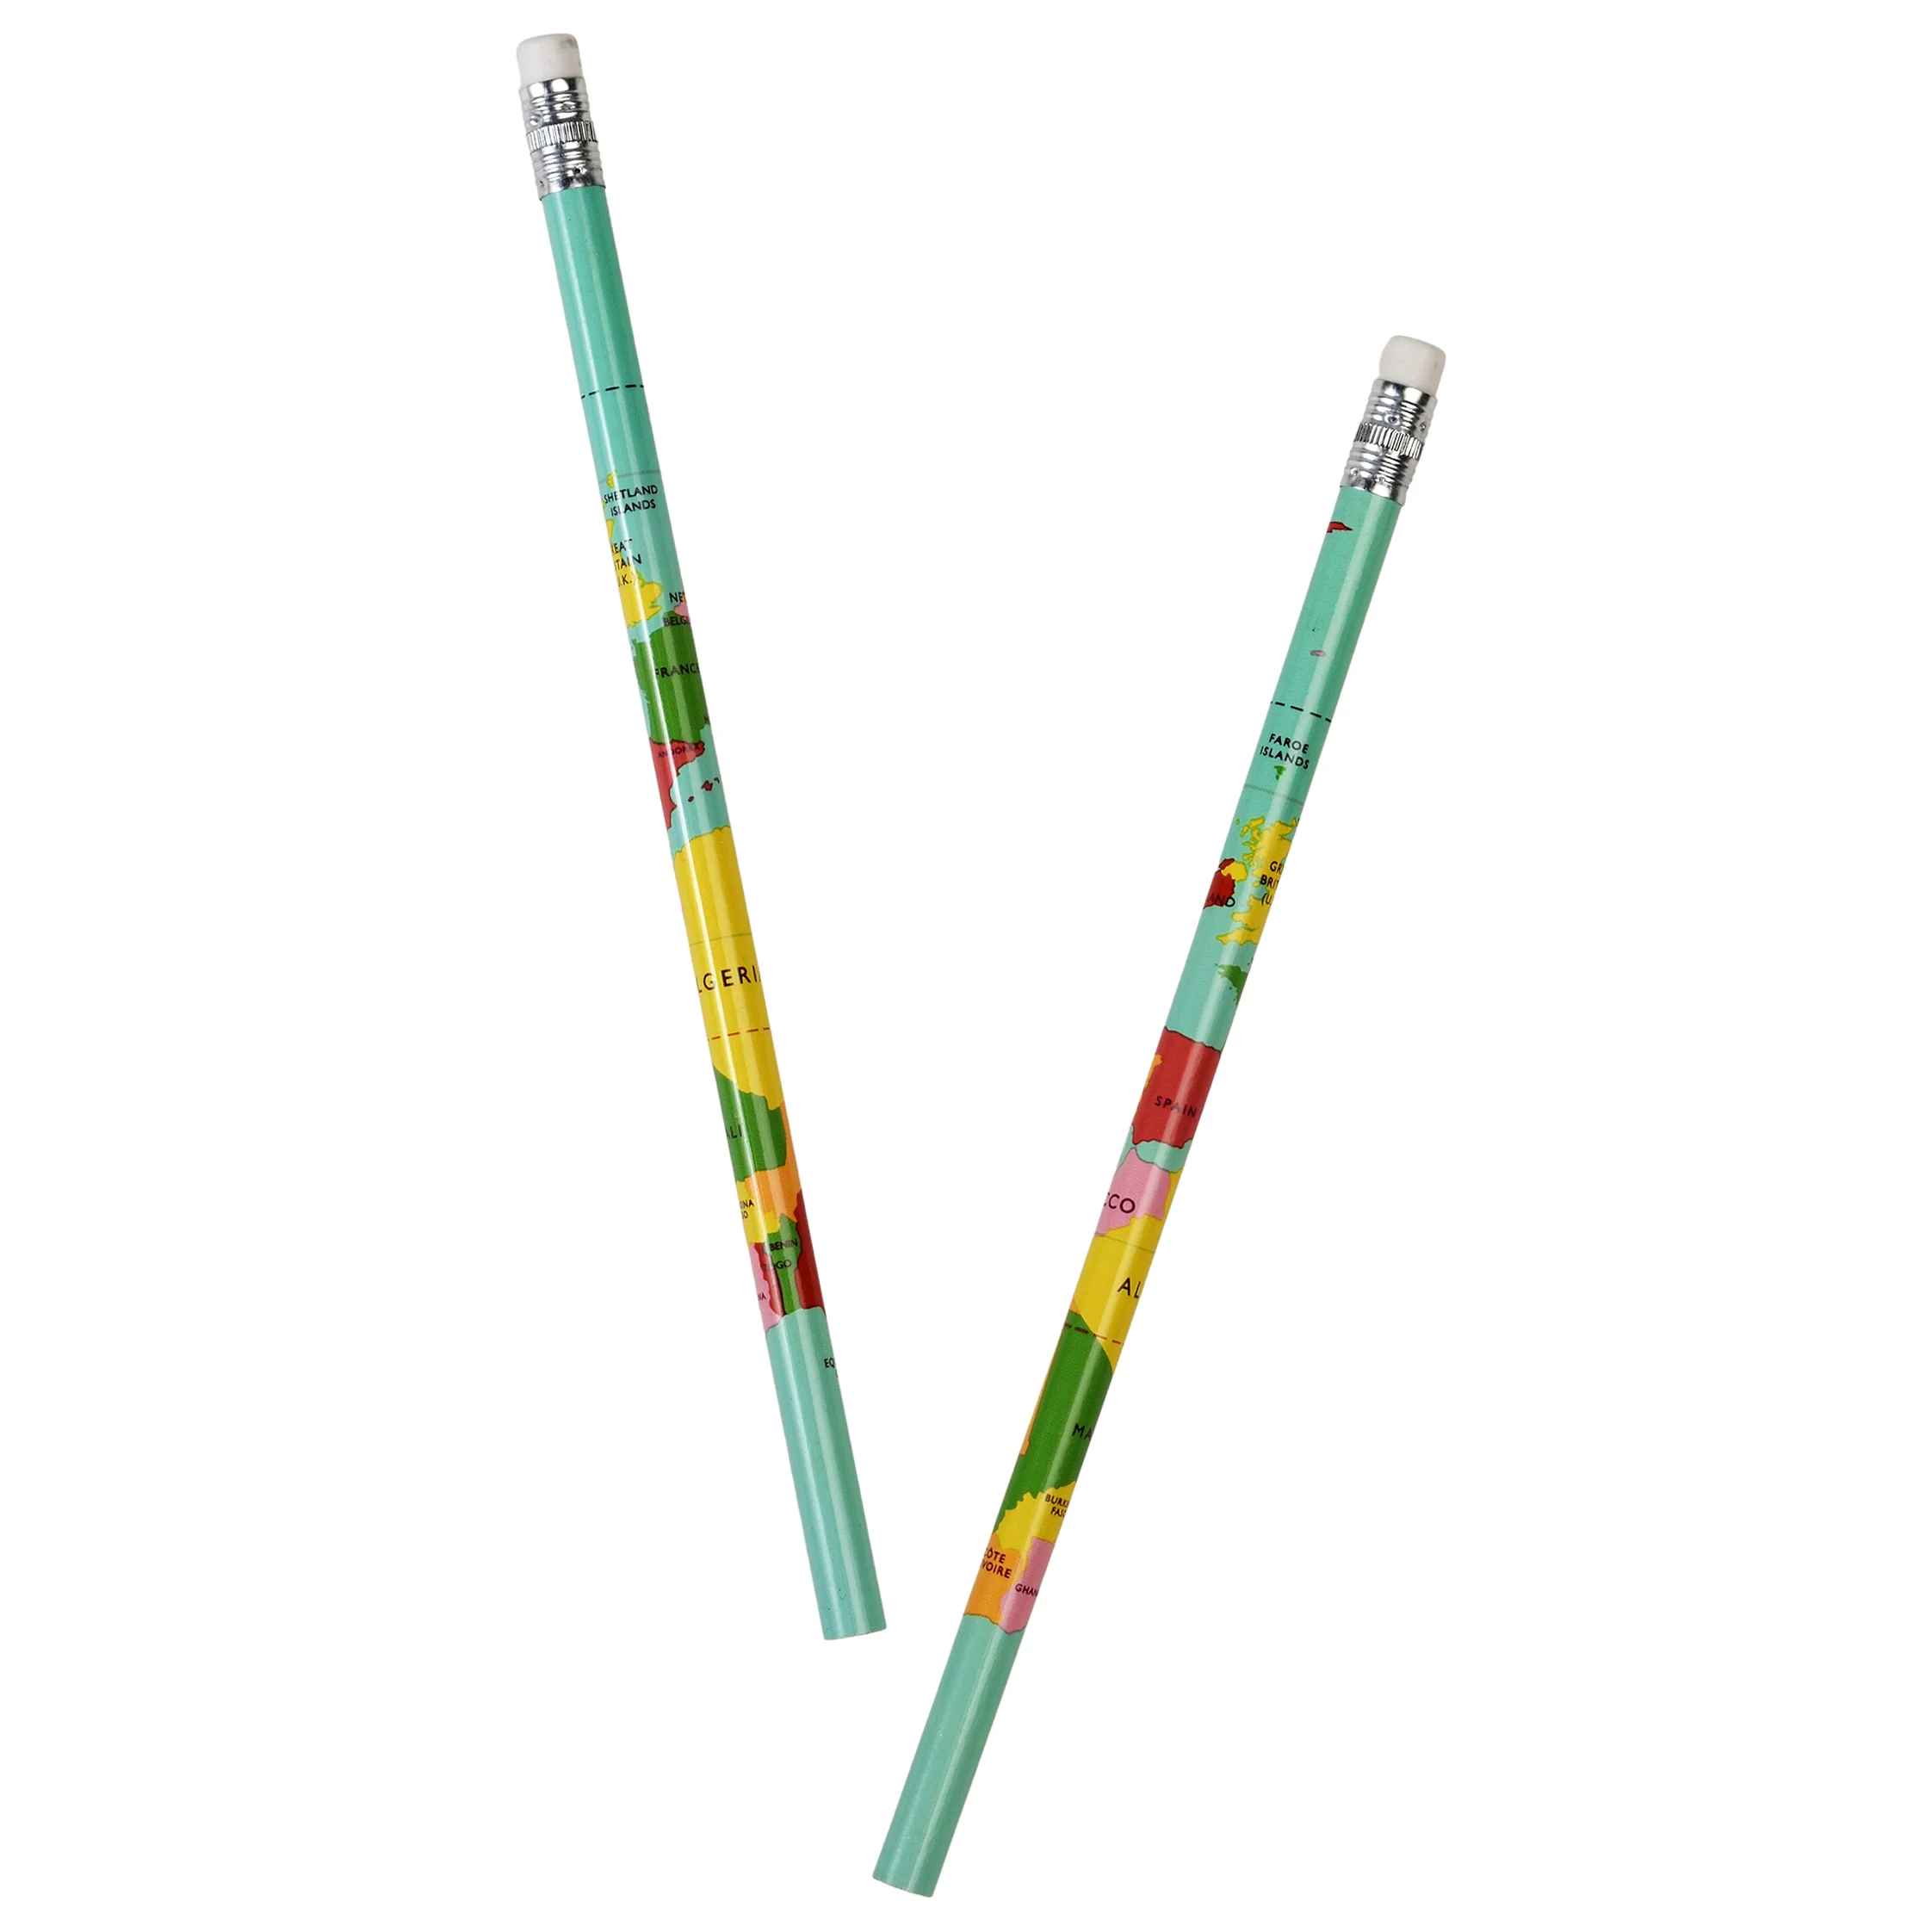 hb pencils (pack of 6) - world map